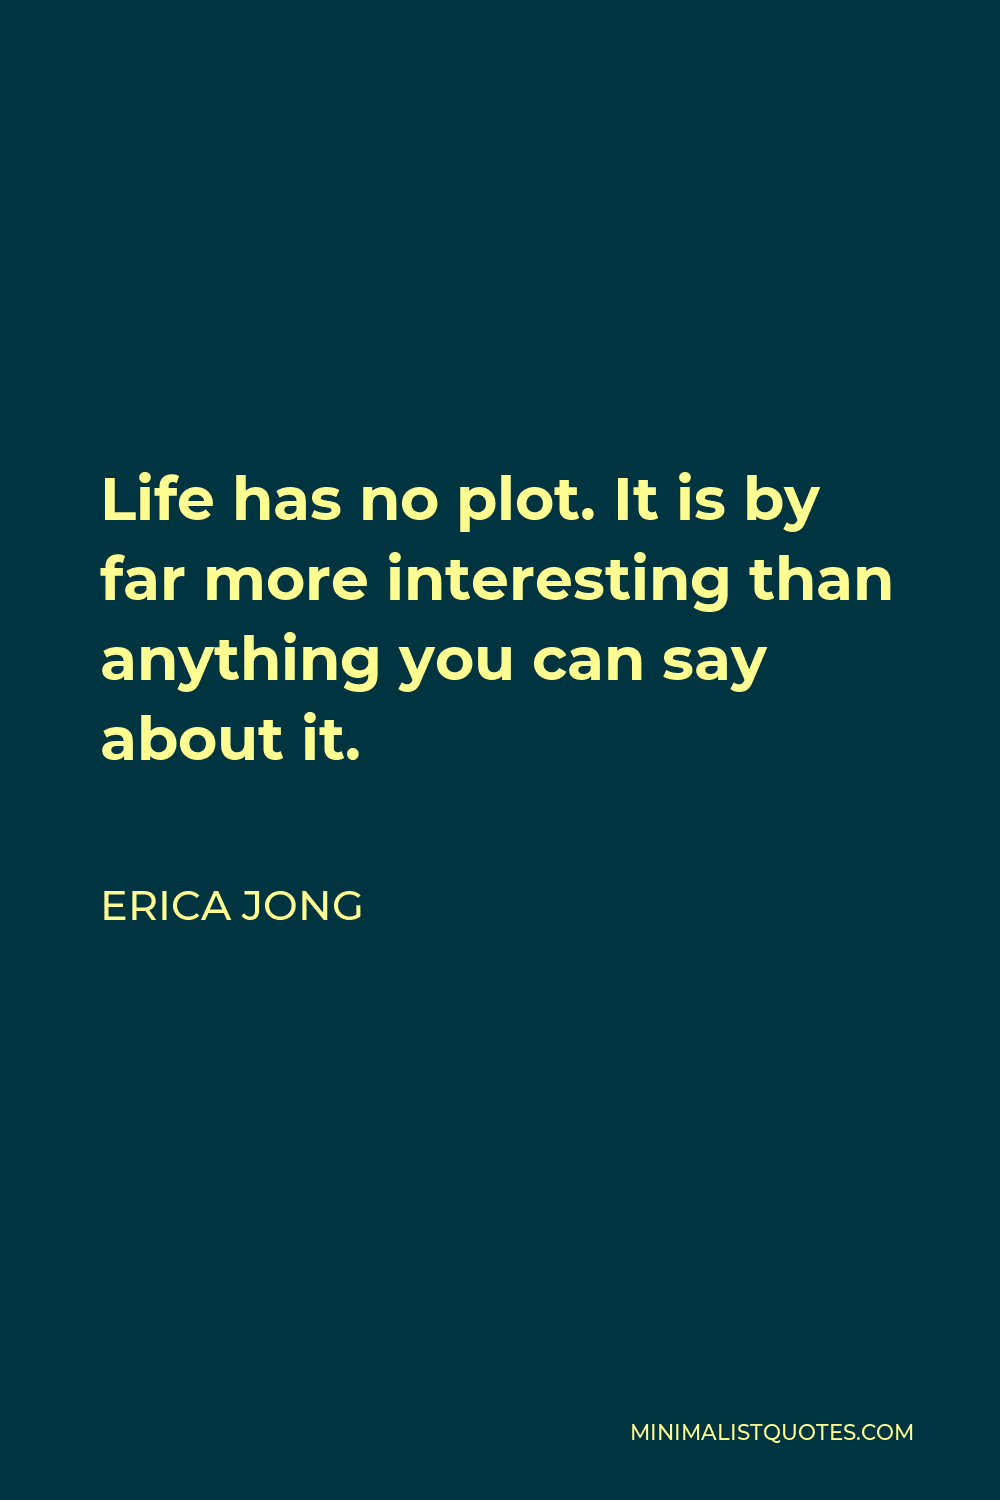 Erica Jong Quote - Life has no plot. It is by far more interesting than anything you can say about it.